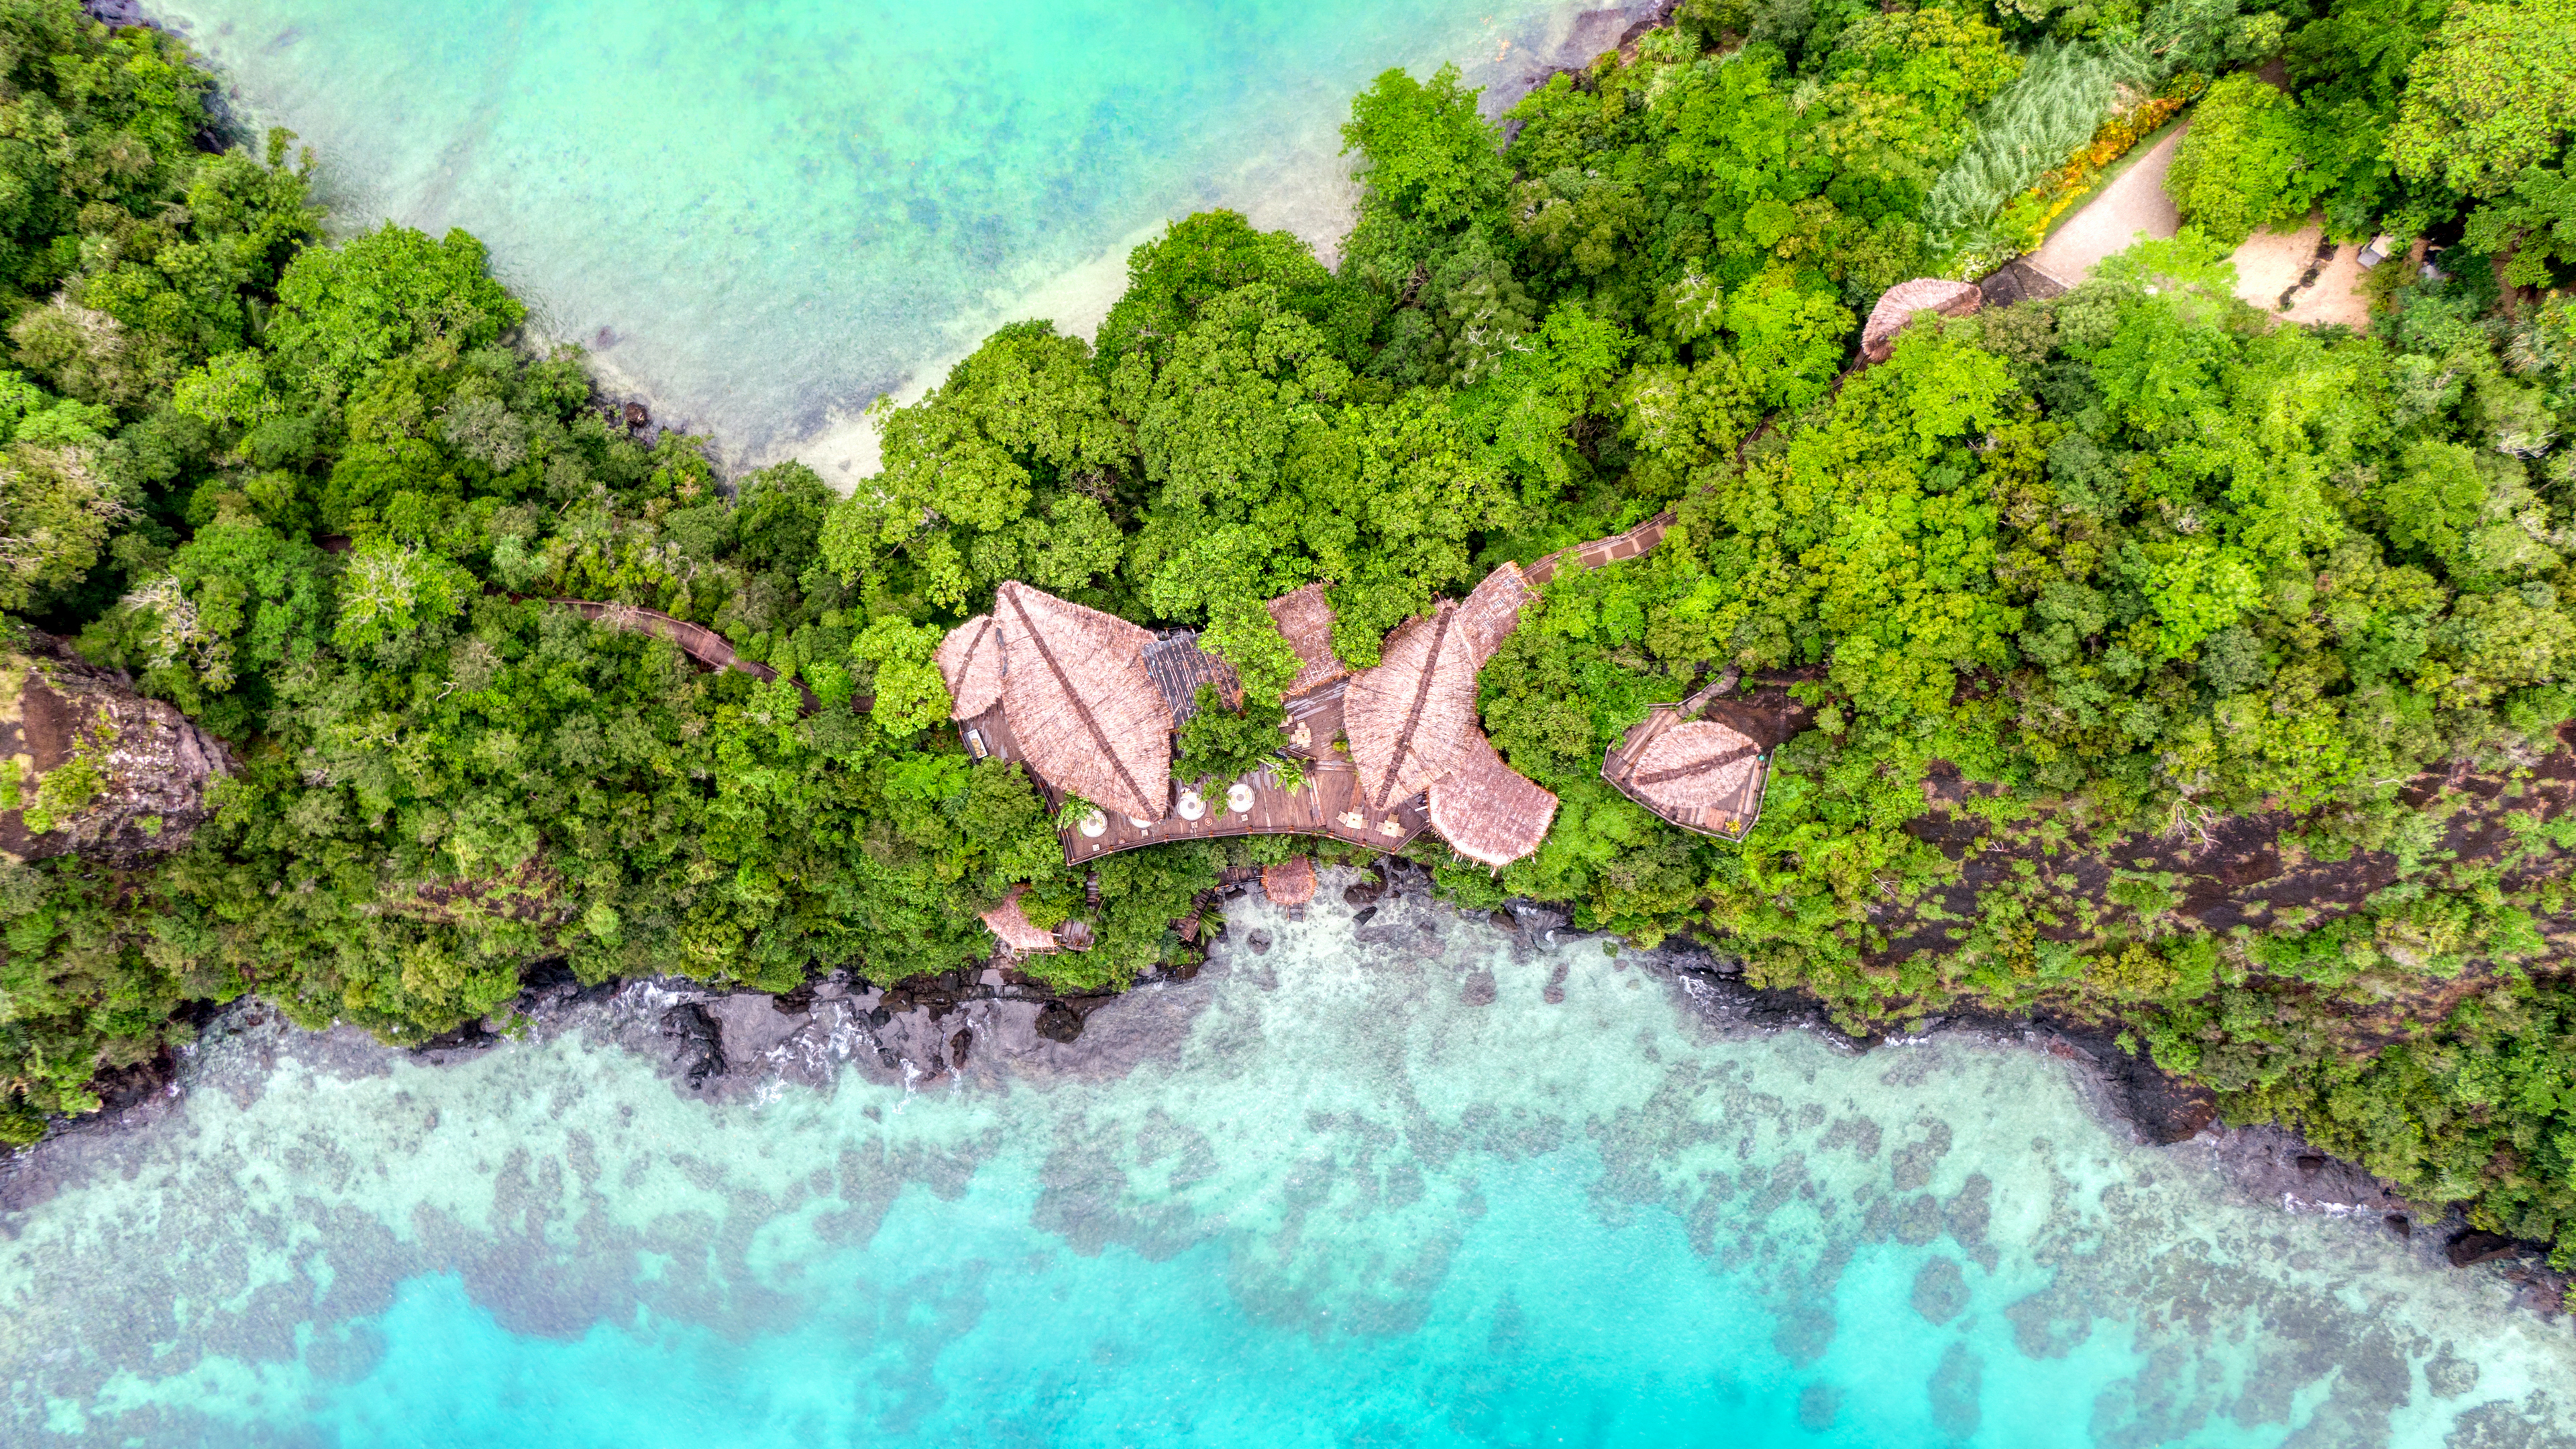 Photography Landscape Aerial View Trees Outdoors Forest Water Bungalow Shore Bay Resort Plants Fiji 3840x2160